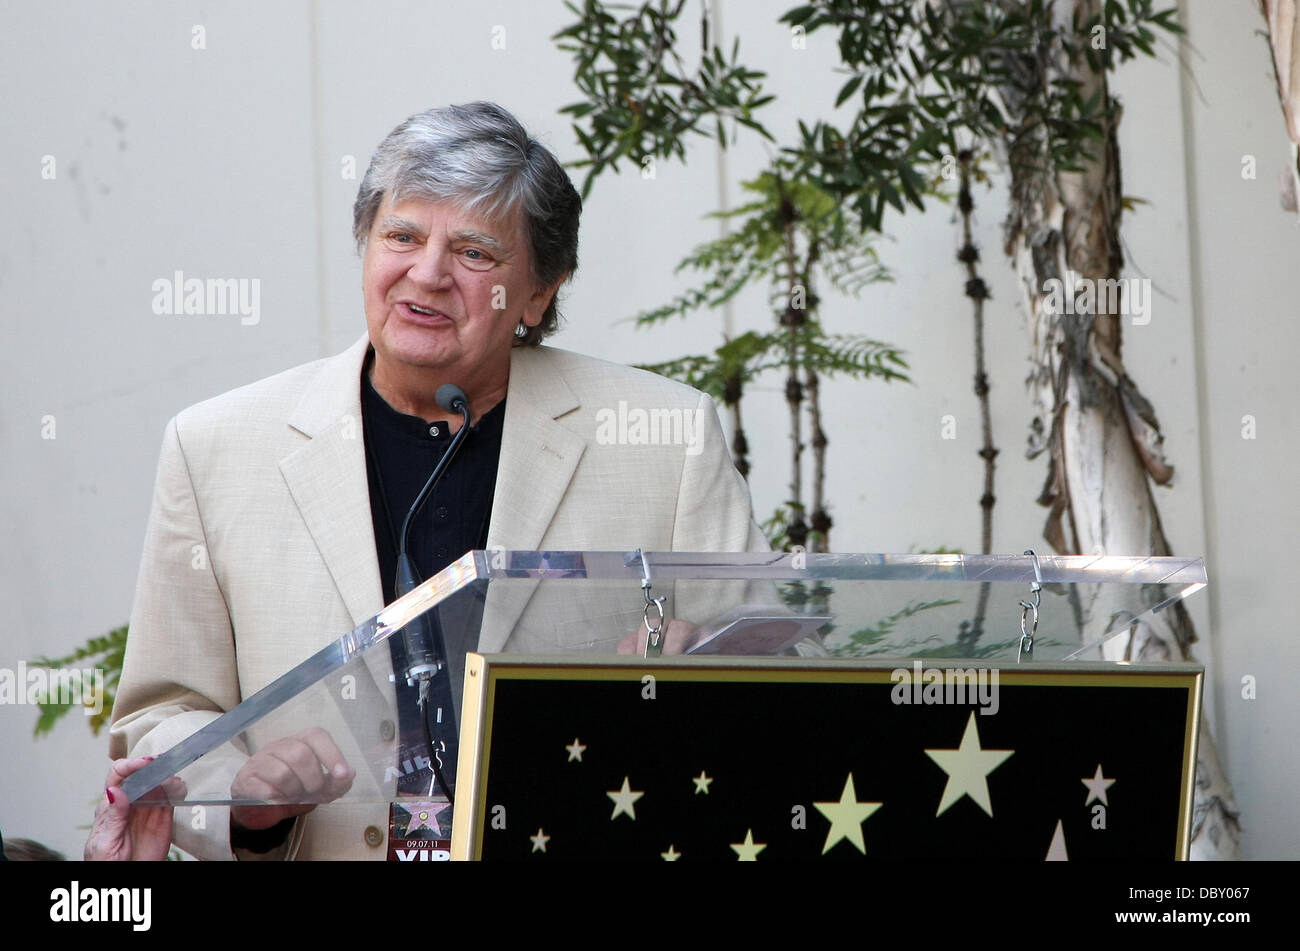 Phil Everly Buddy Holly Star Unveiling On The Hollywood Walk Of Fame Held In Front of Capital Records Hollywood, California - 07.09.11 Stock Photo